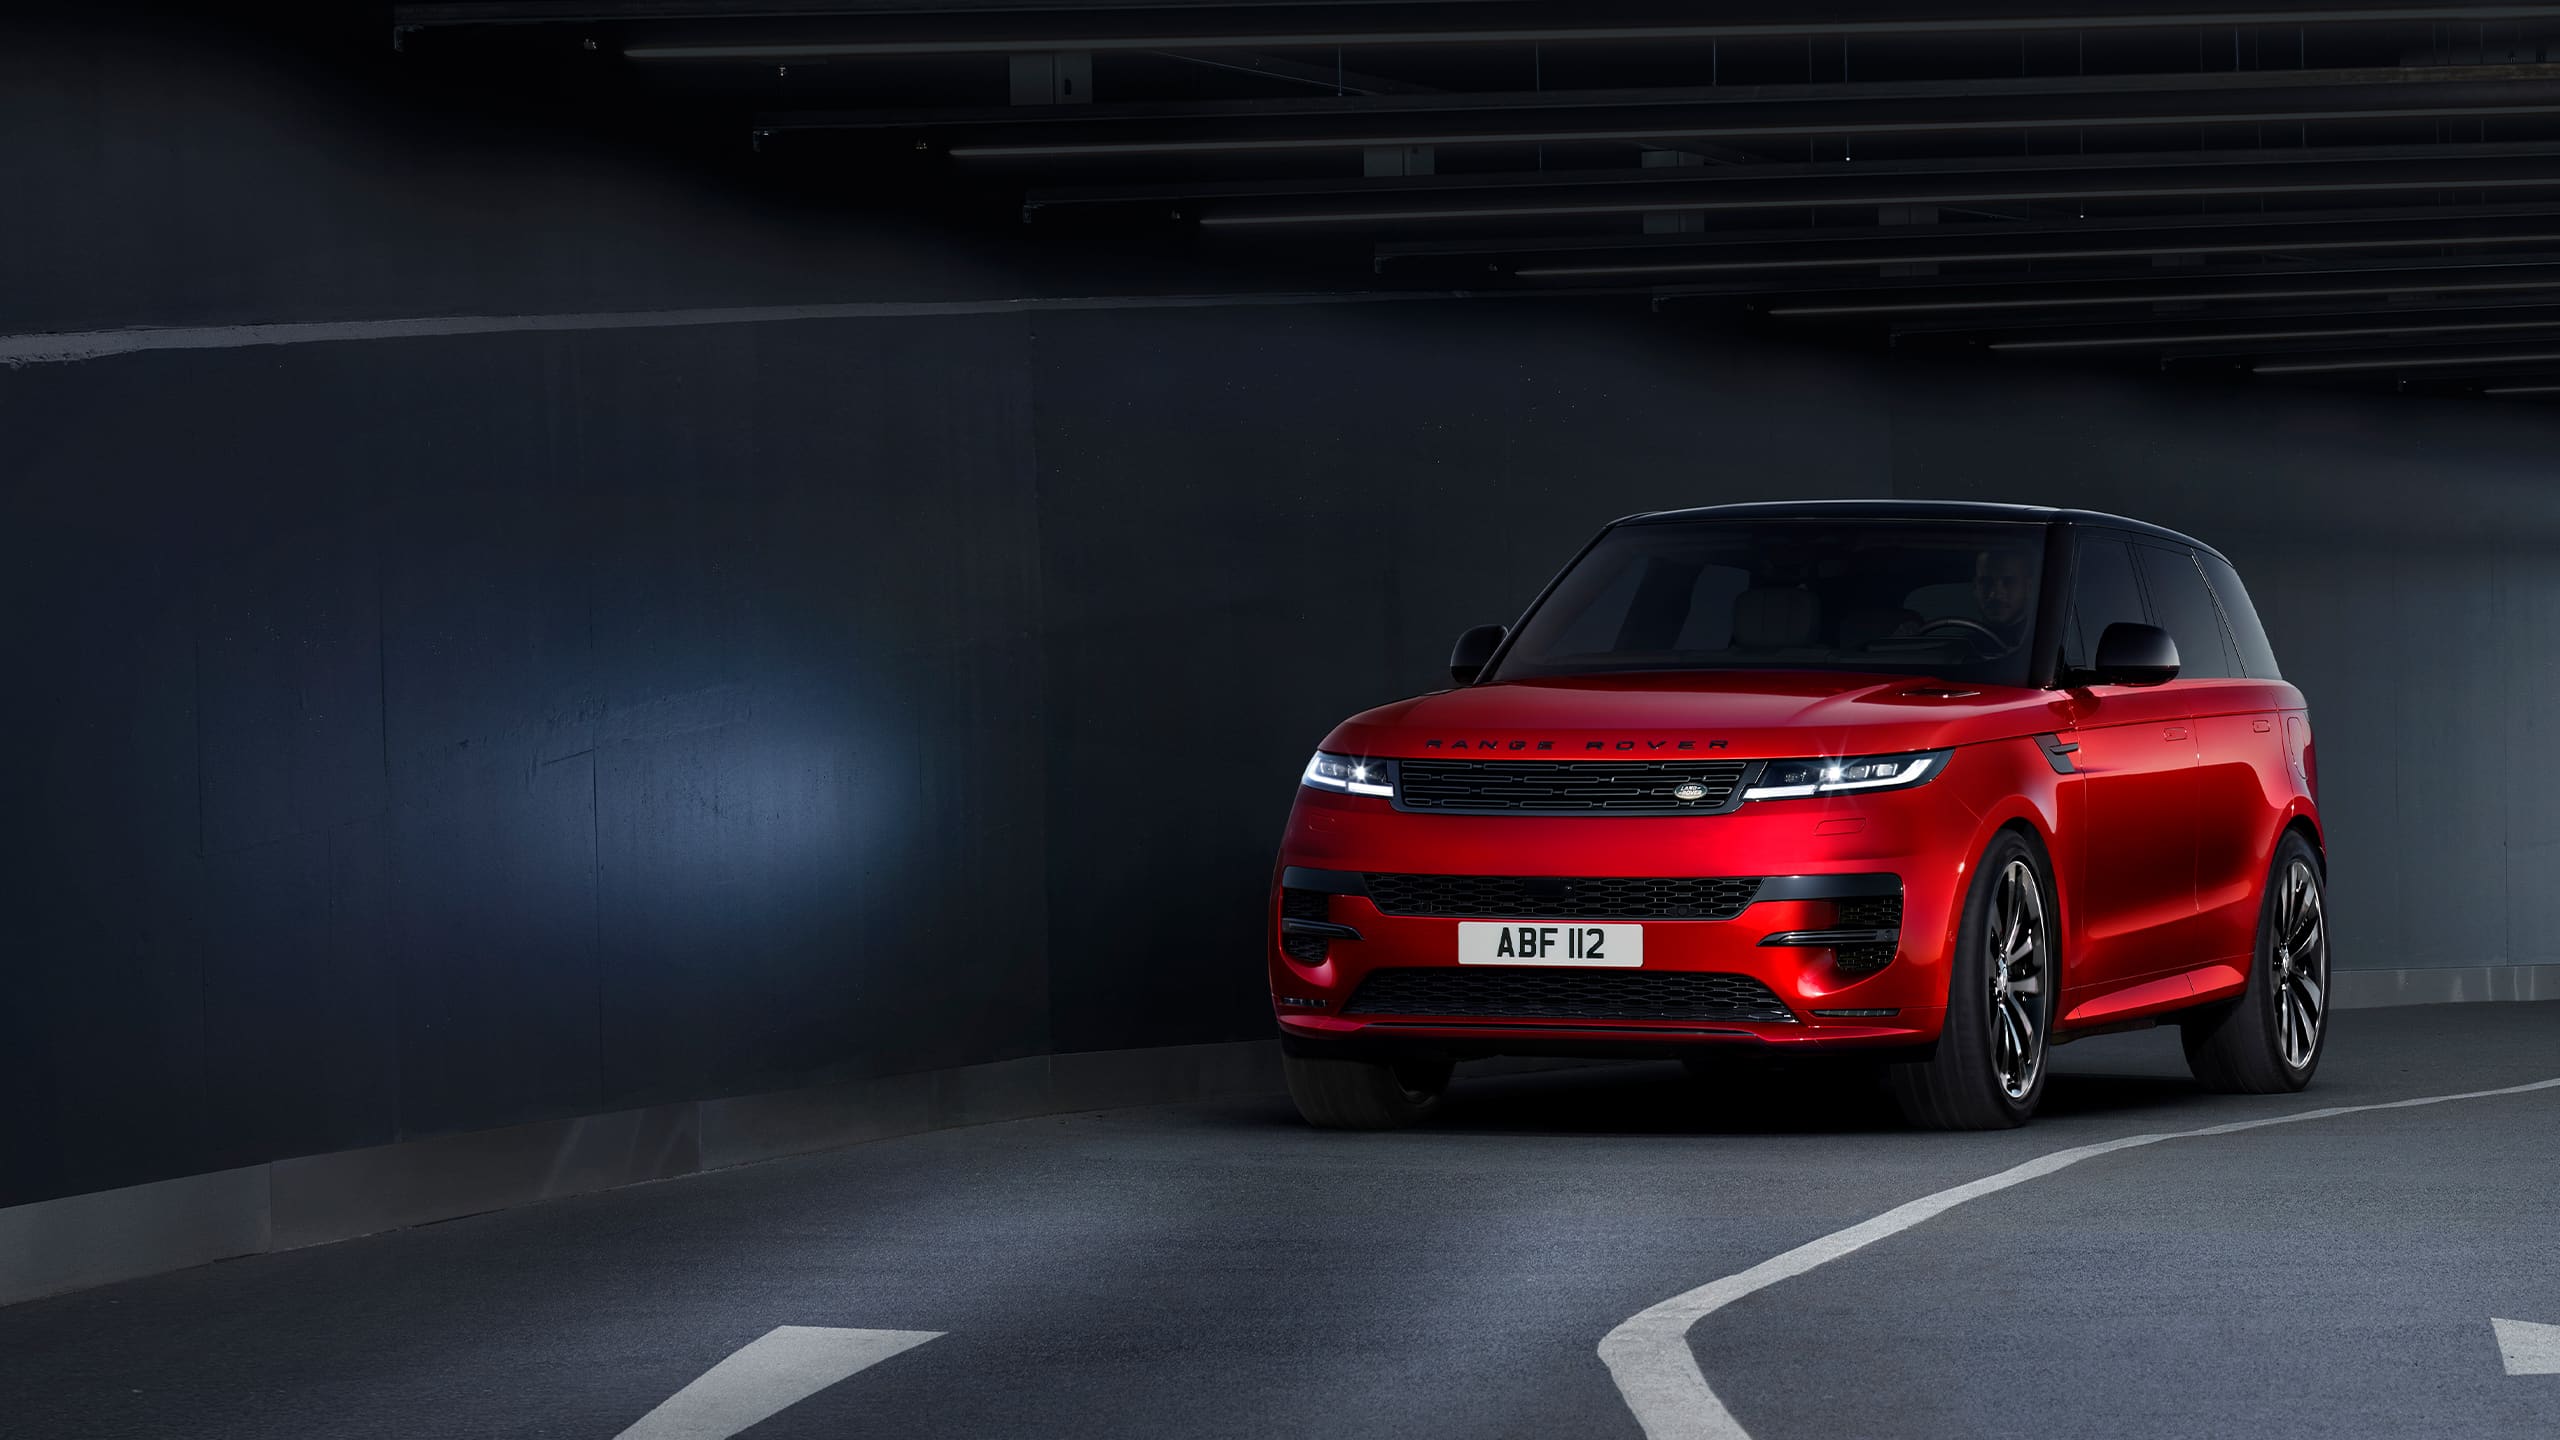 New Range Rover Sport Front Profile at Exclusive Preview Event